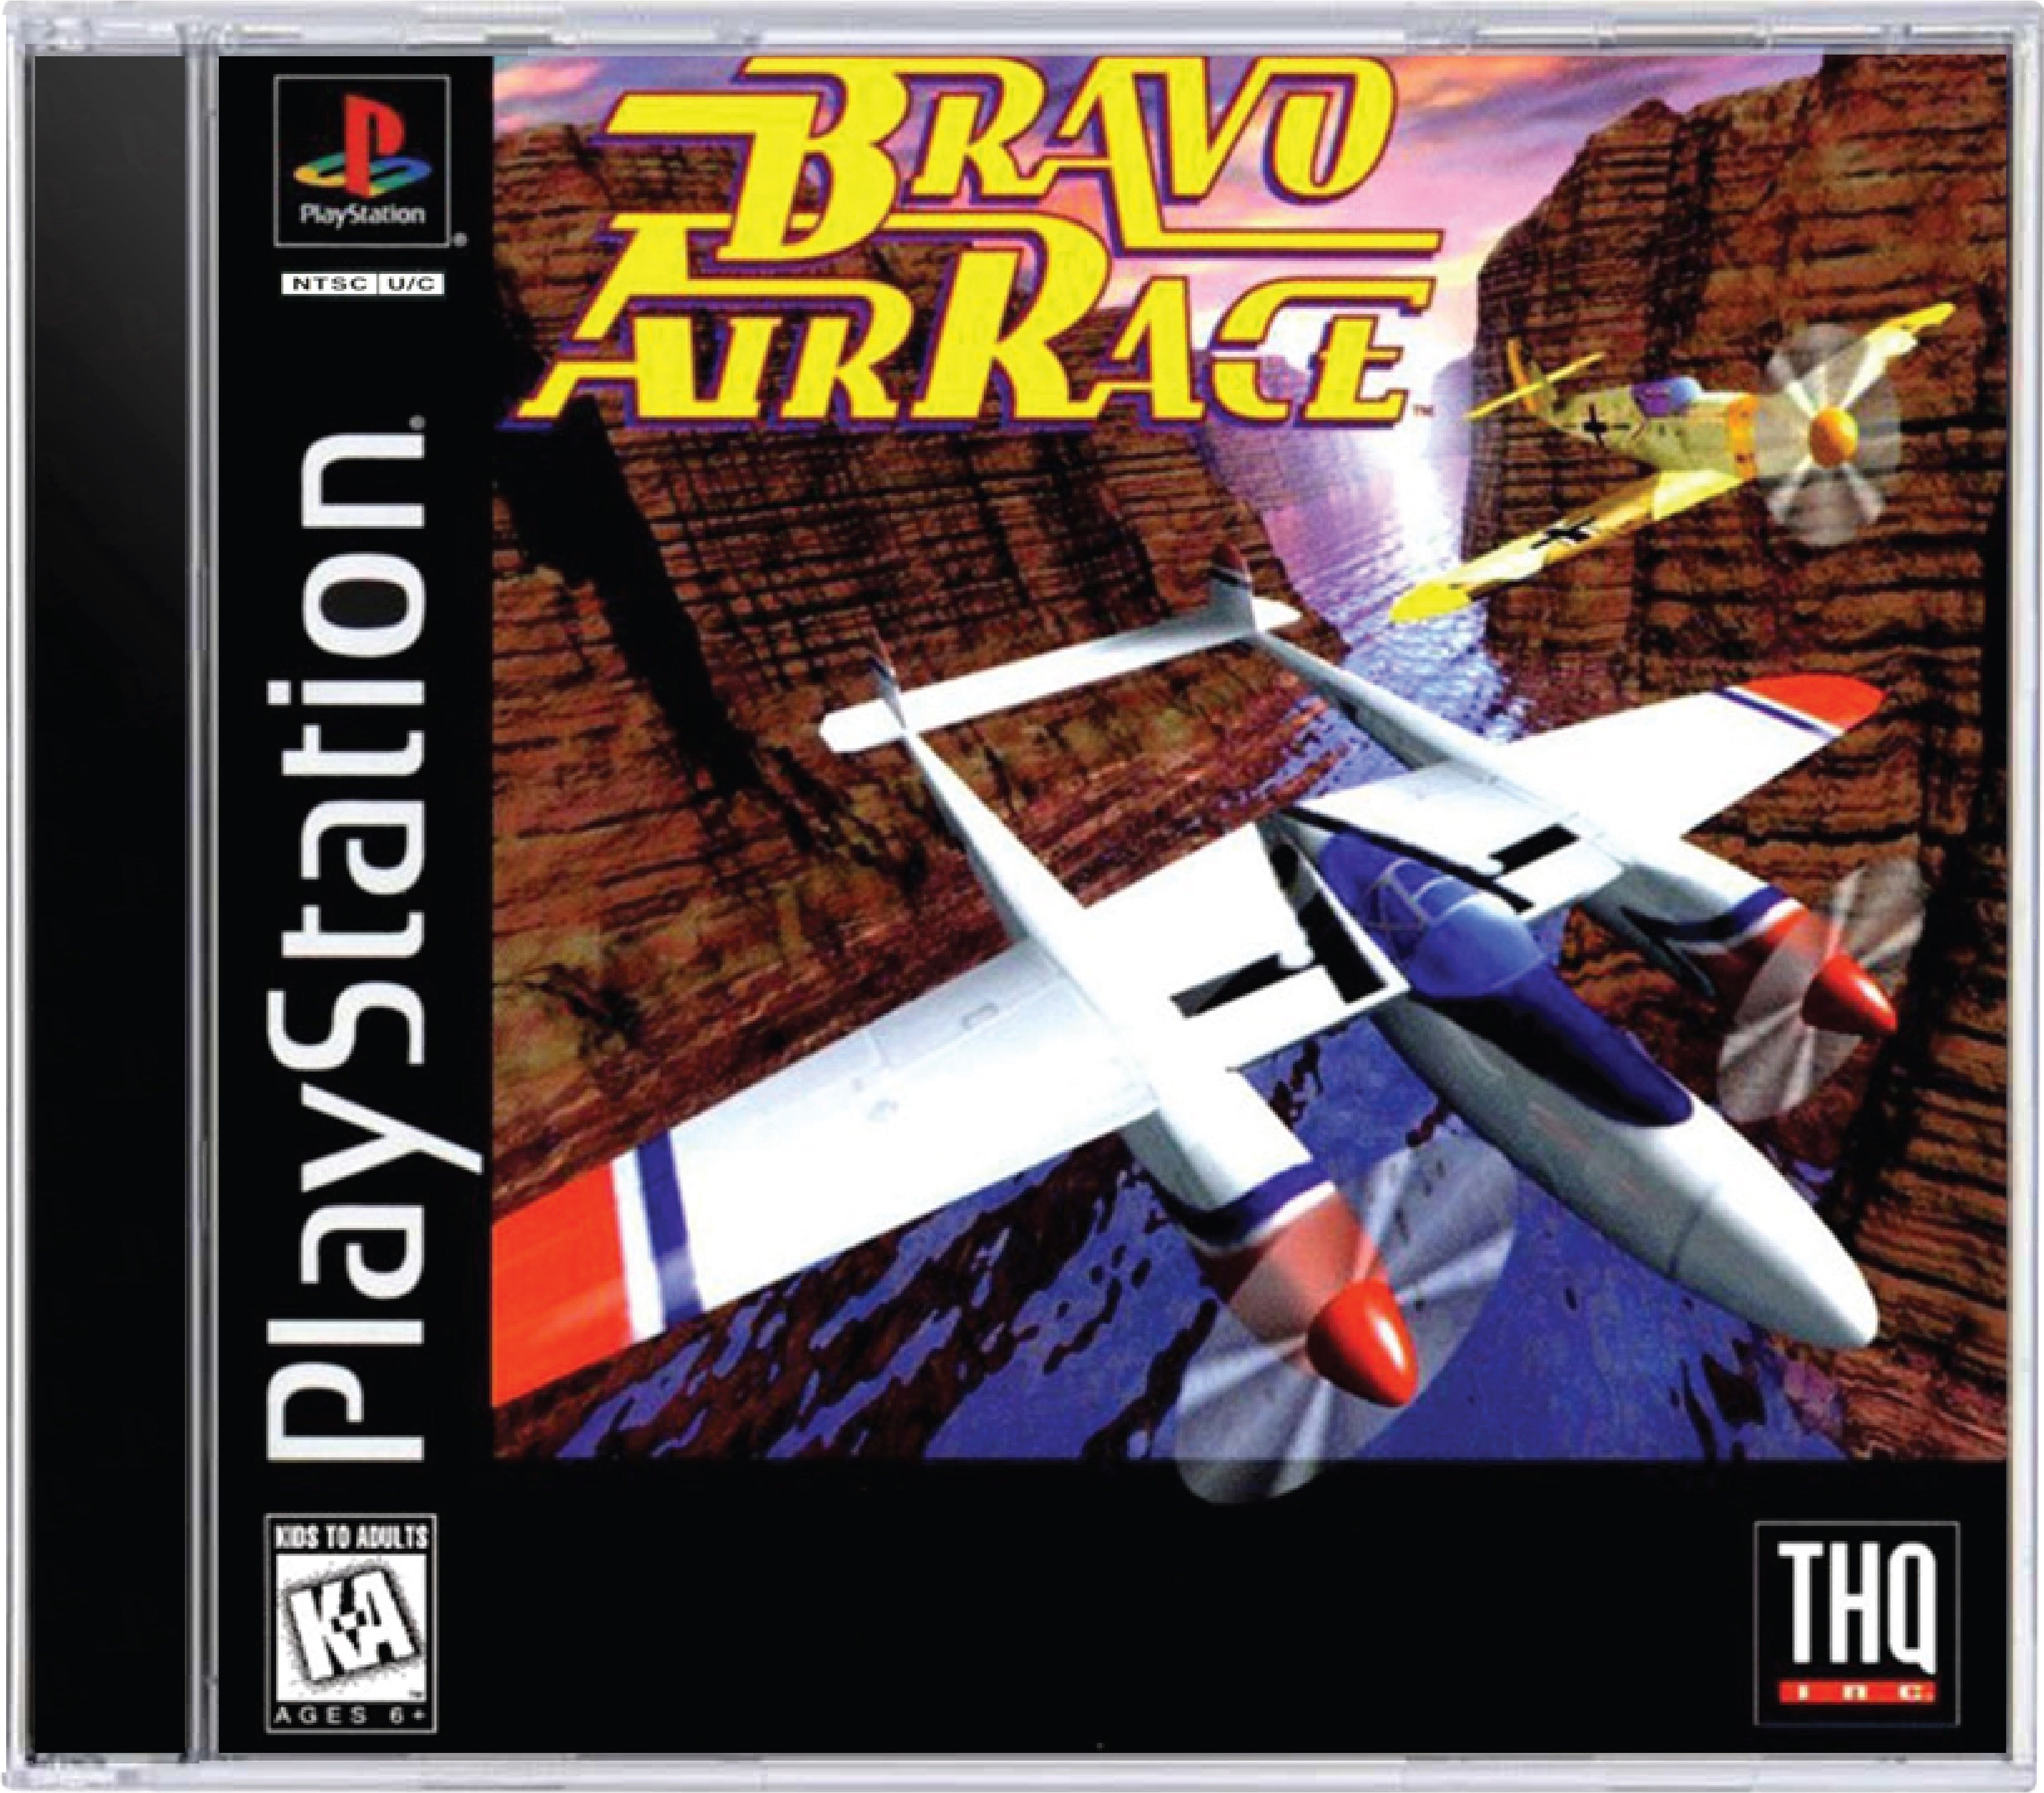 Bravo Air Race Cover Art and Product Photo